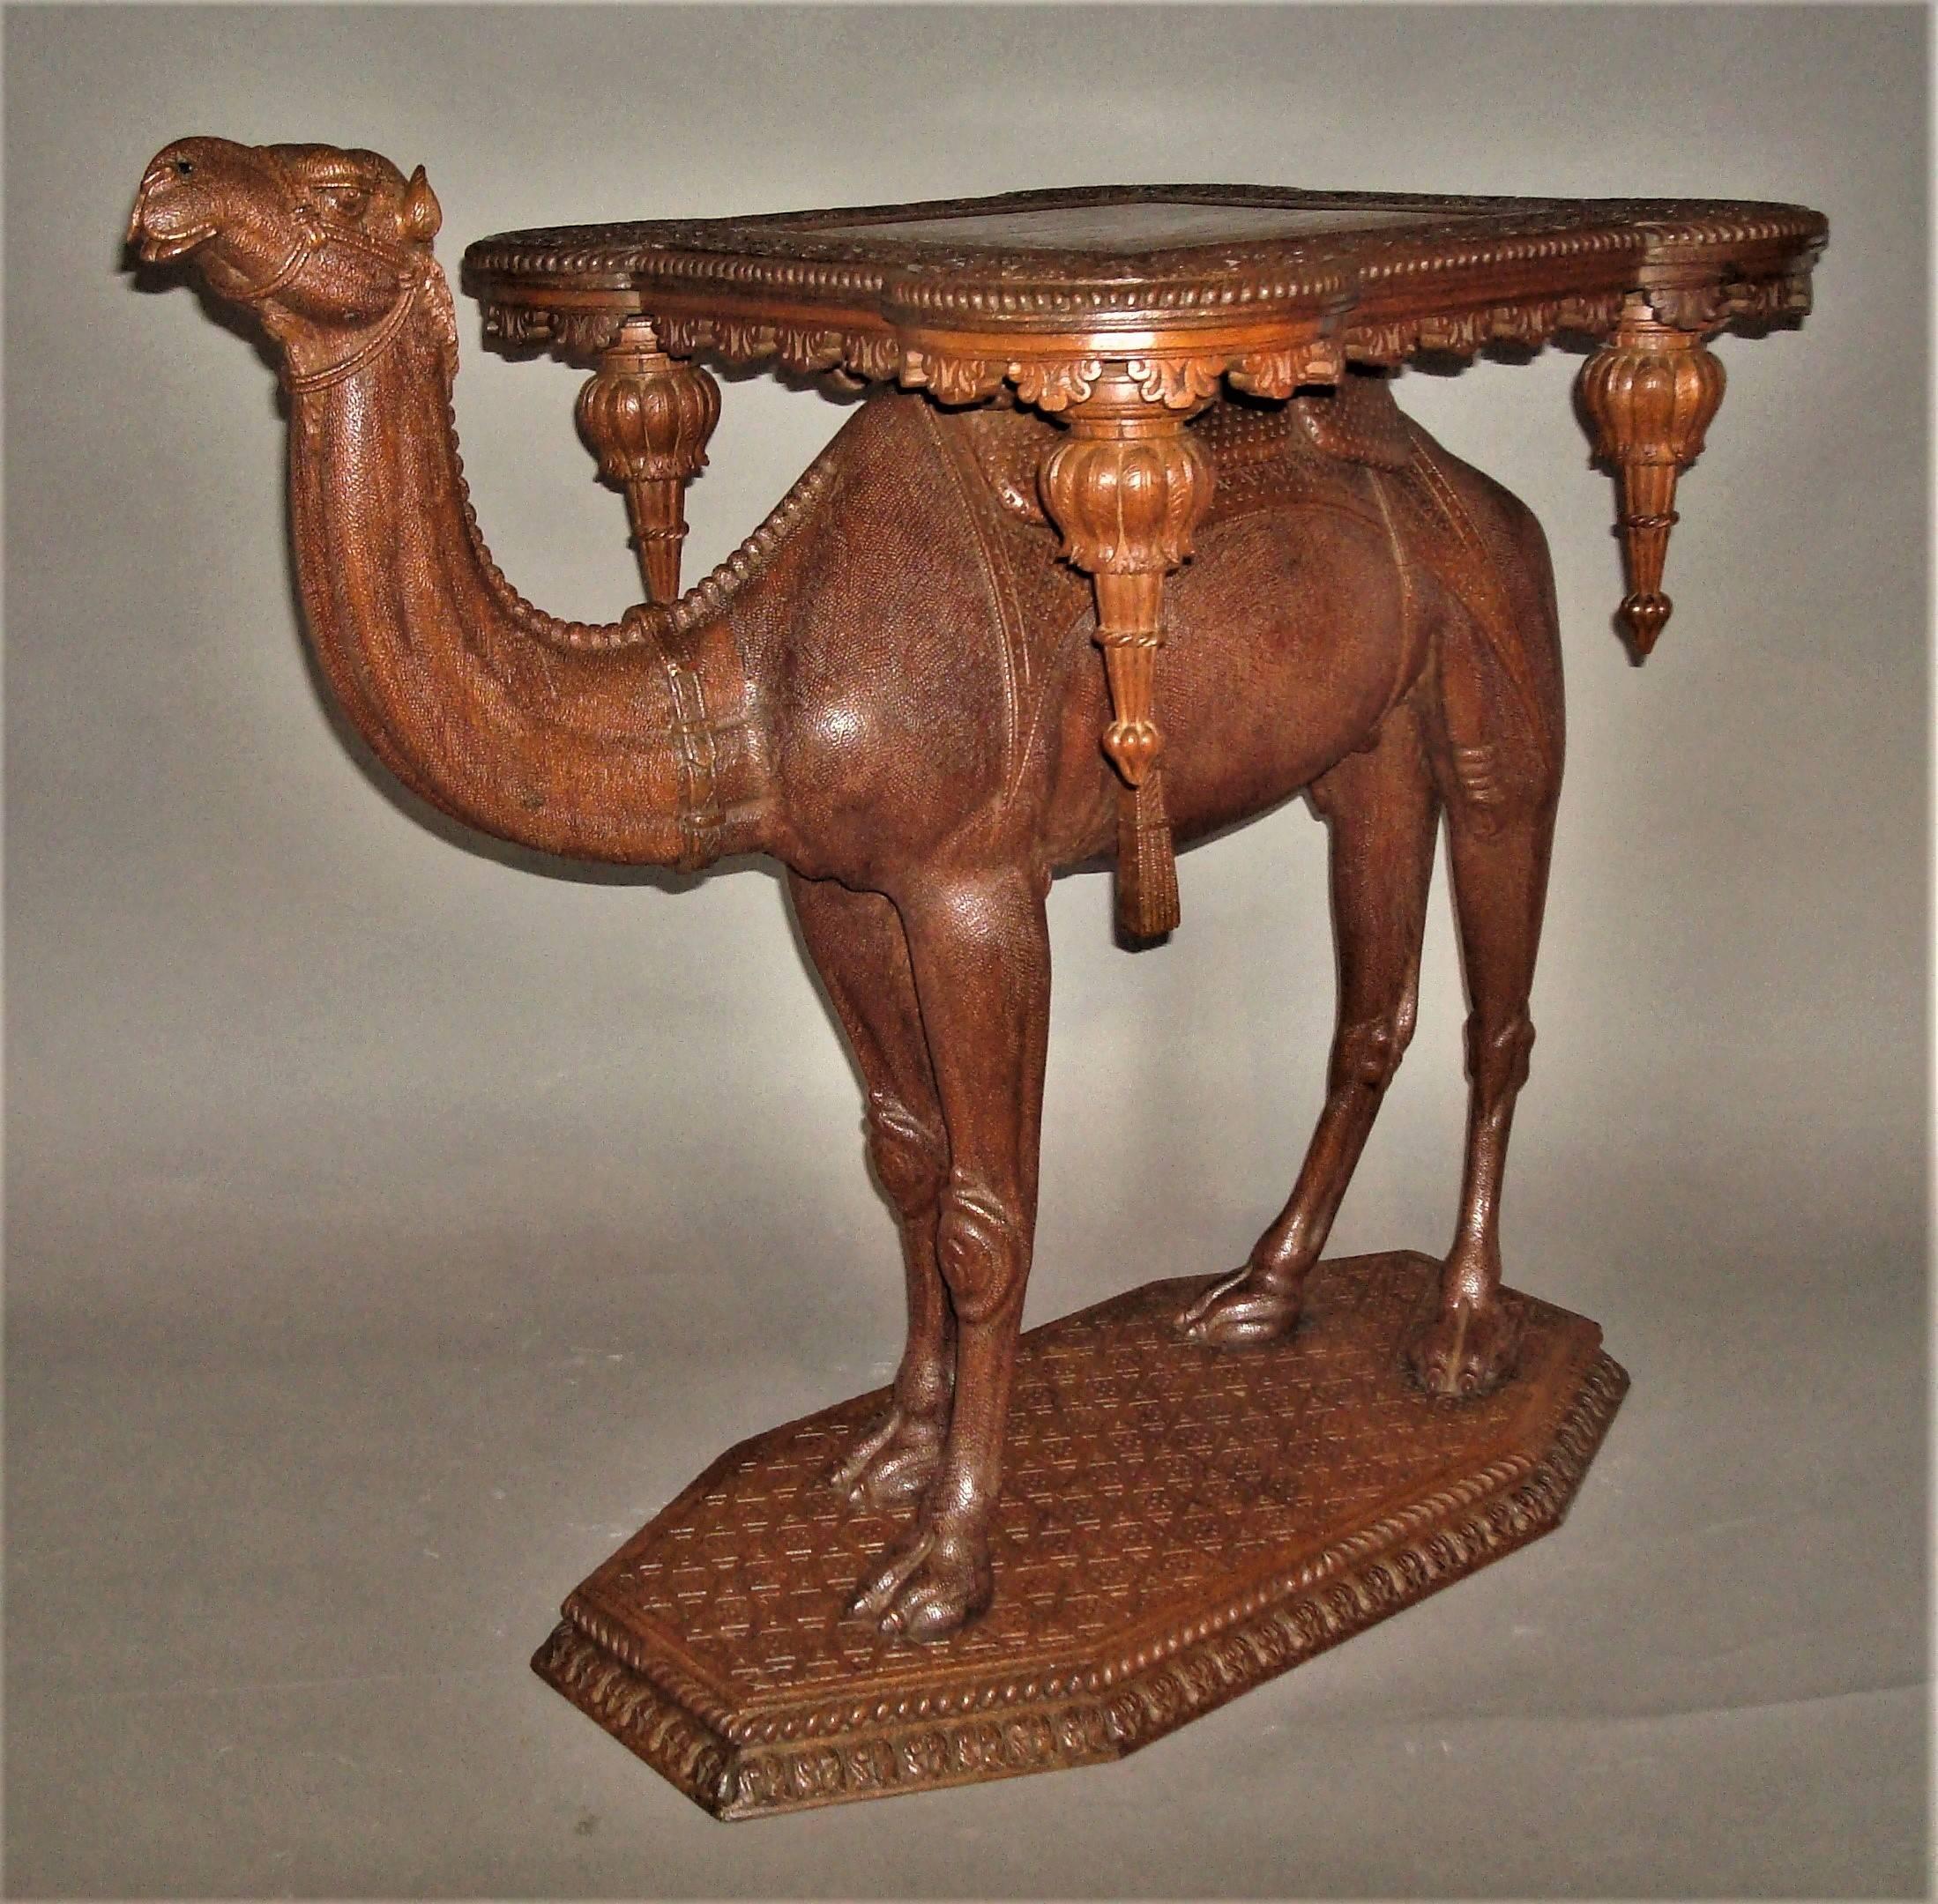 Exceptional 19th century Anglo-Indian carved camel table, a good quality example with fine carving. The unusual shaped square top, with protruding circular corners, having a central square panel and a border profusely carved in relief, with trailing